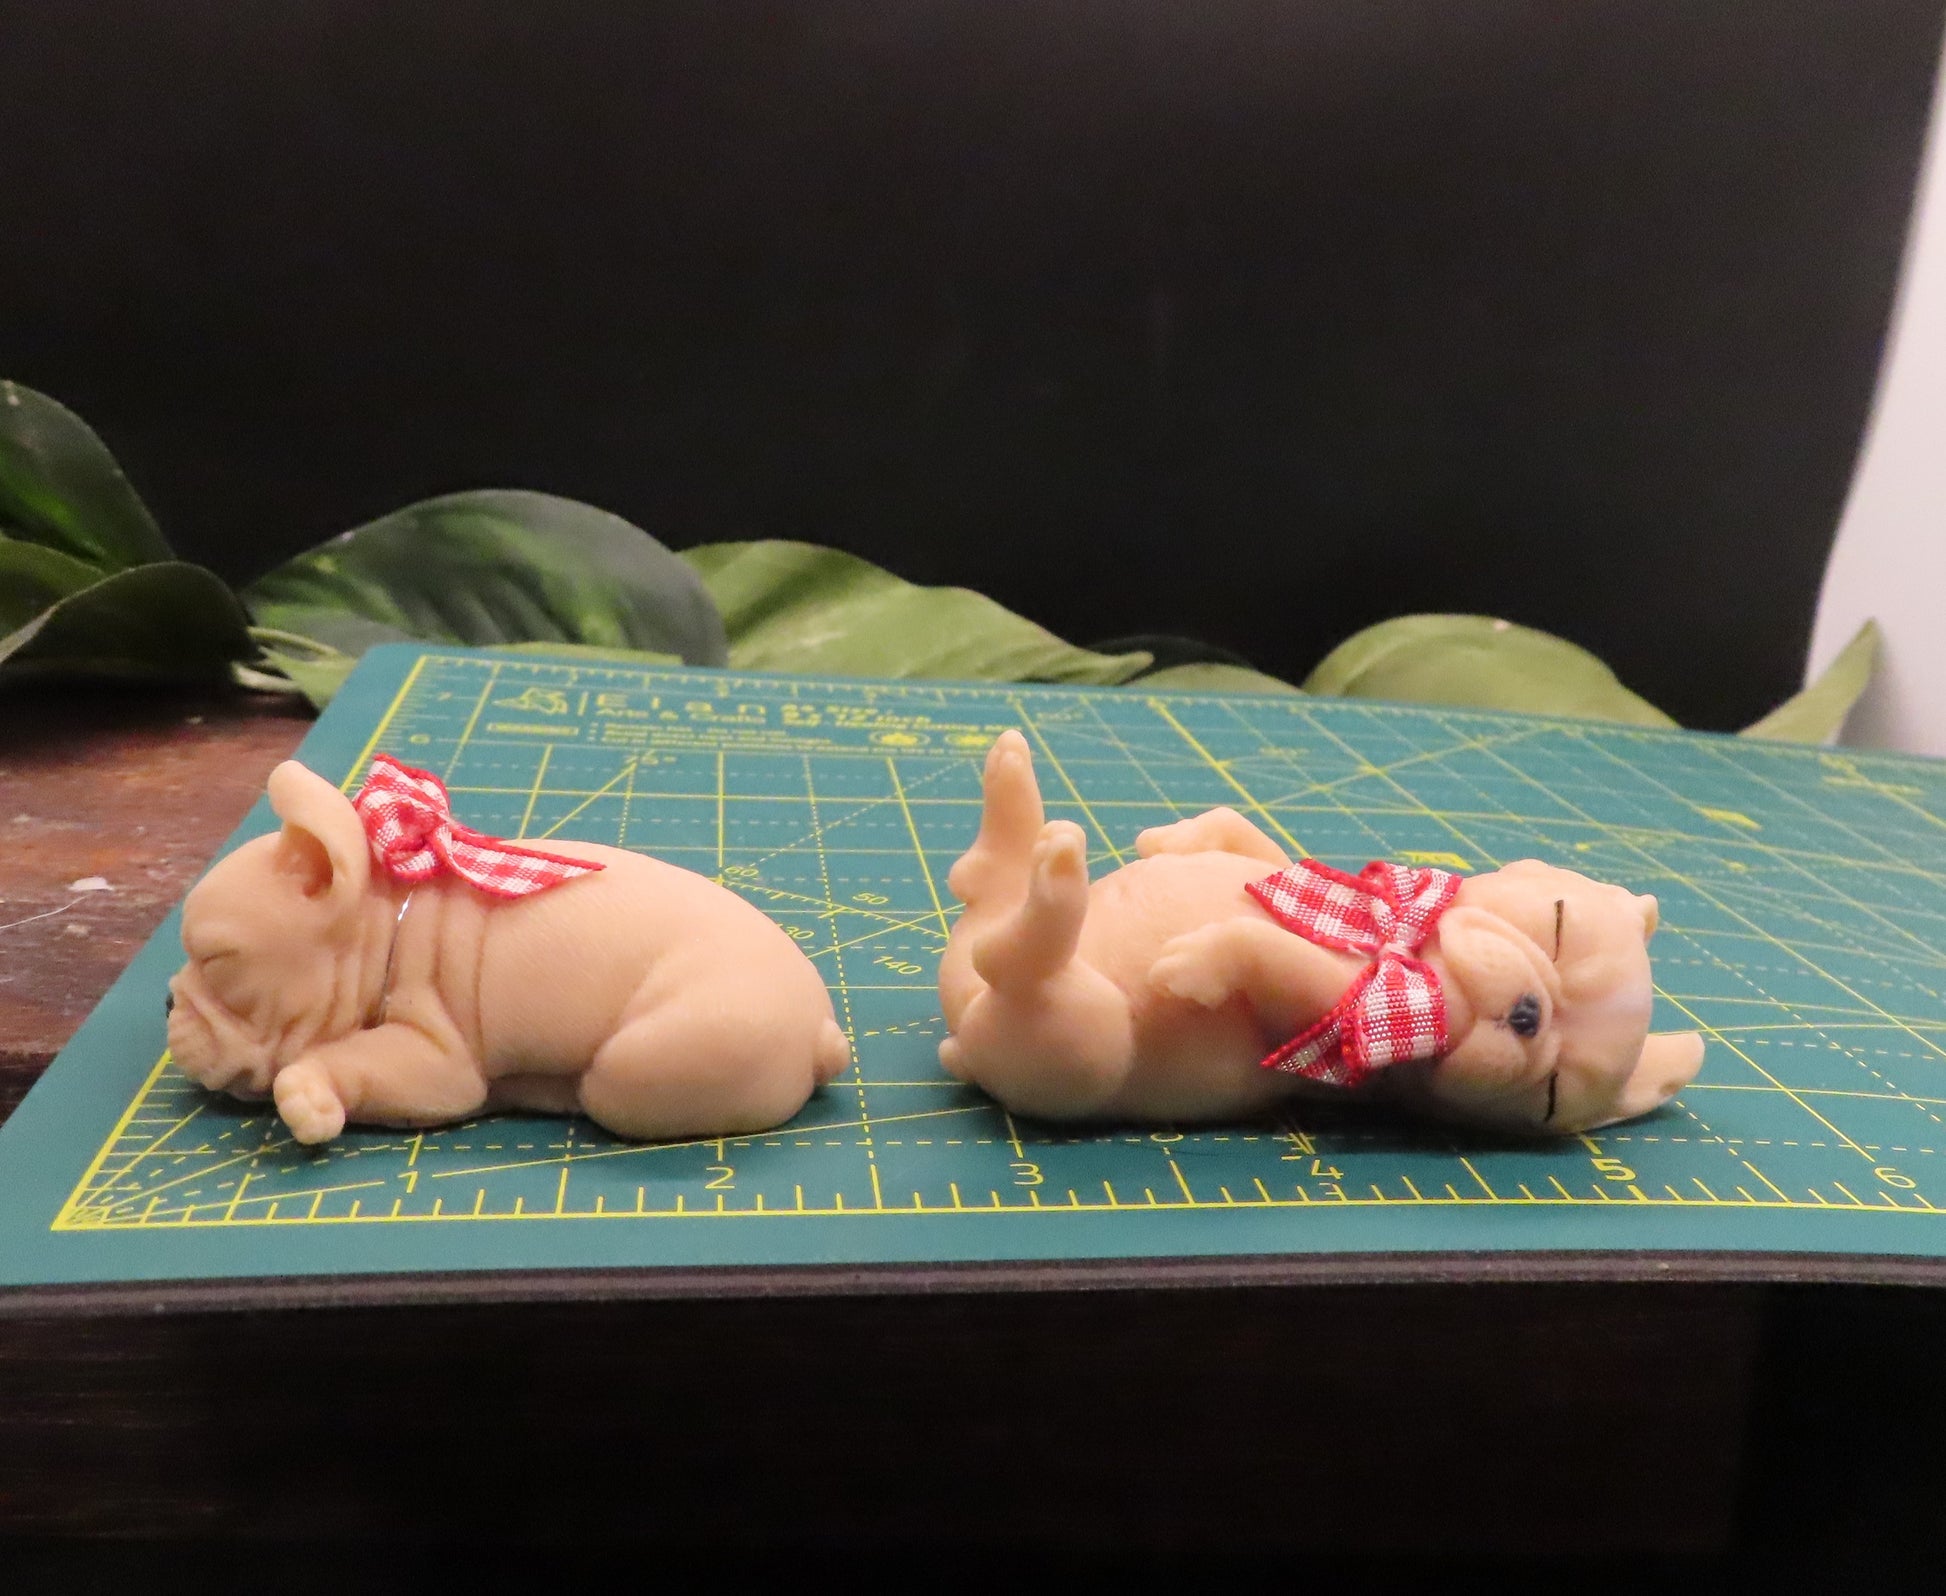 Both puppies in this french bulldog puppy soap set meansure approximately 2 inches